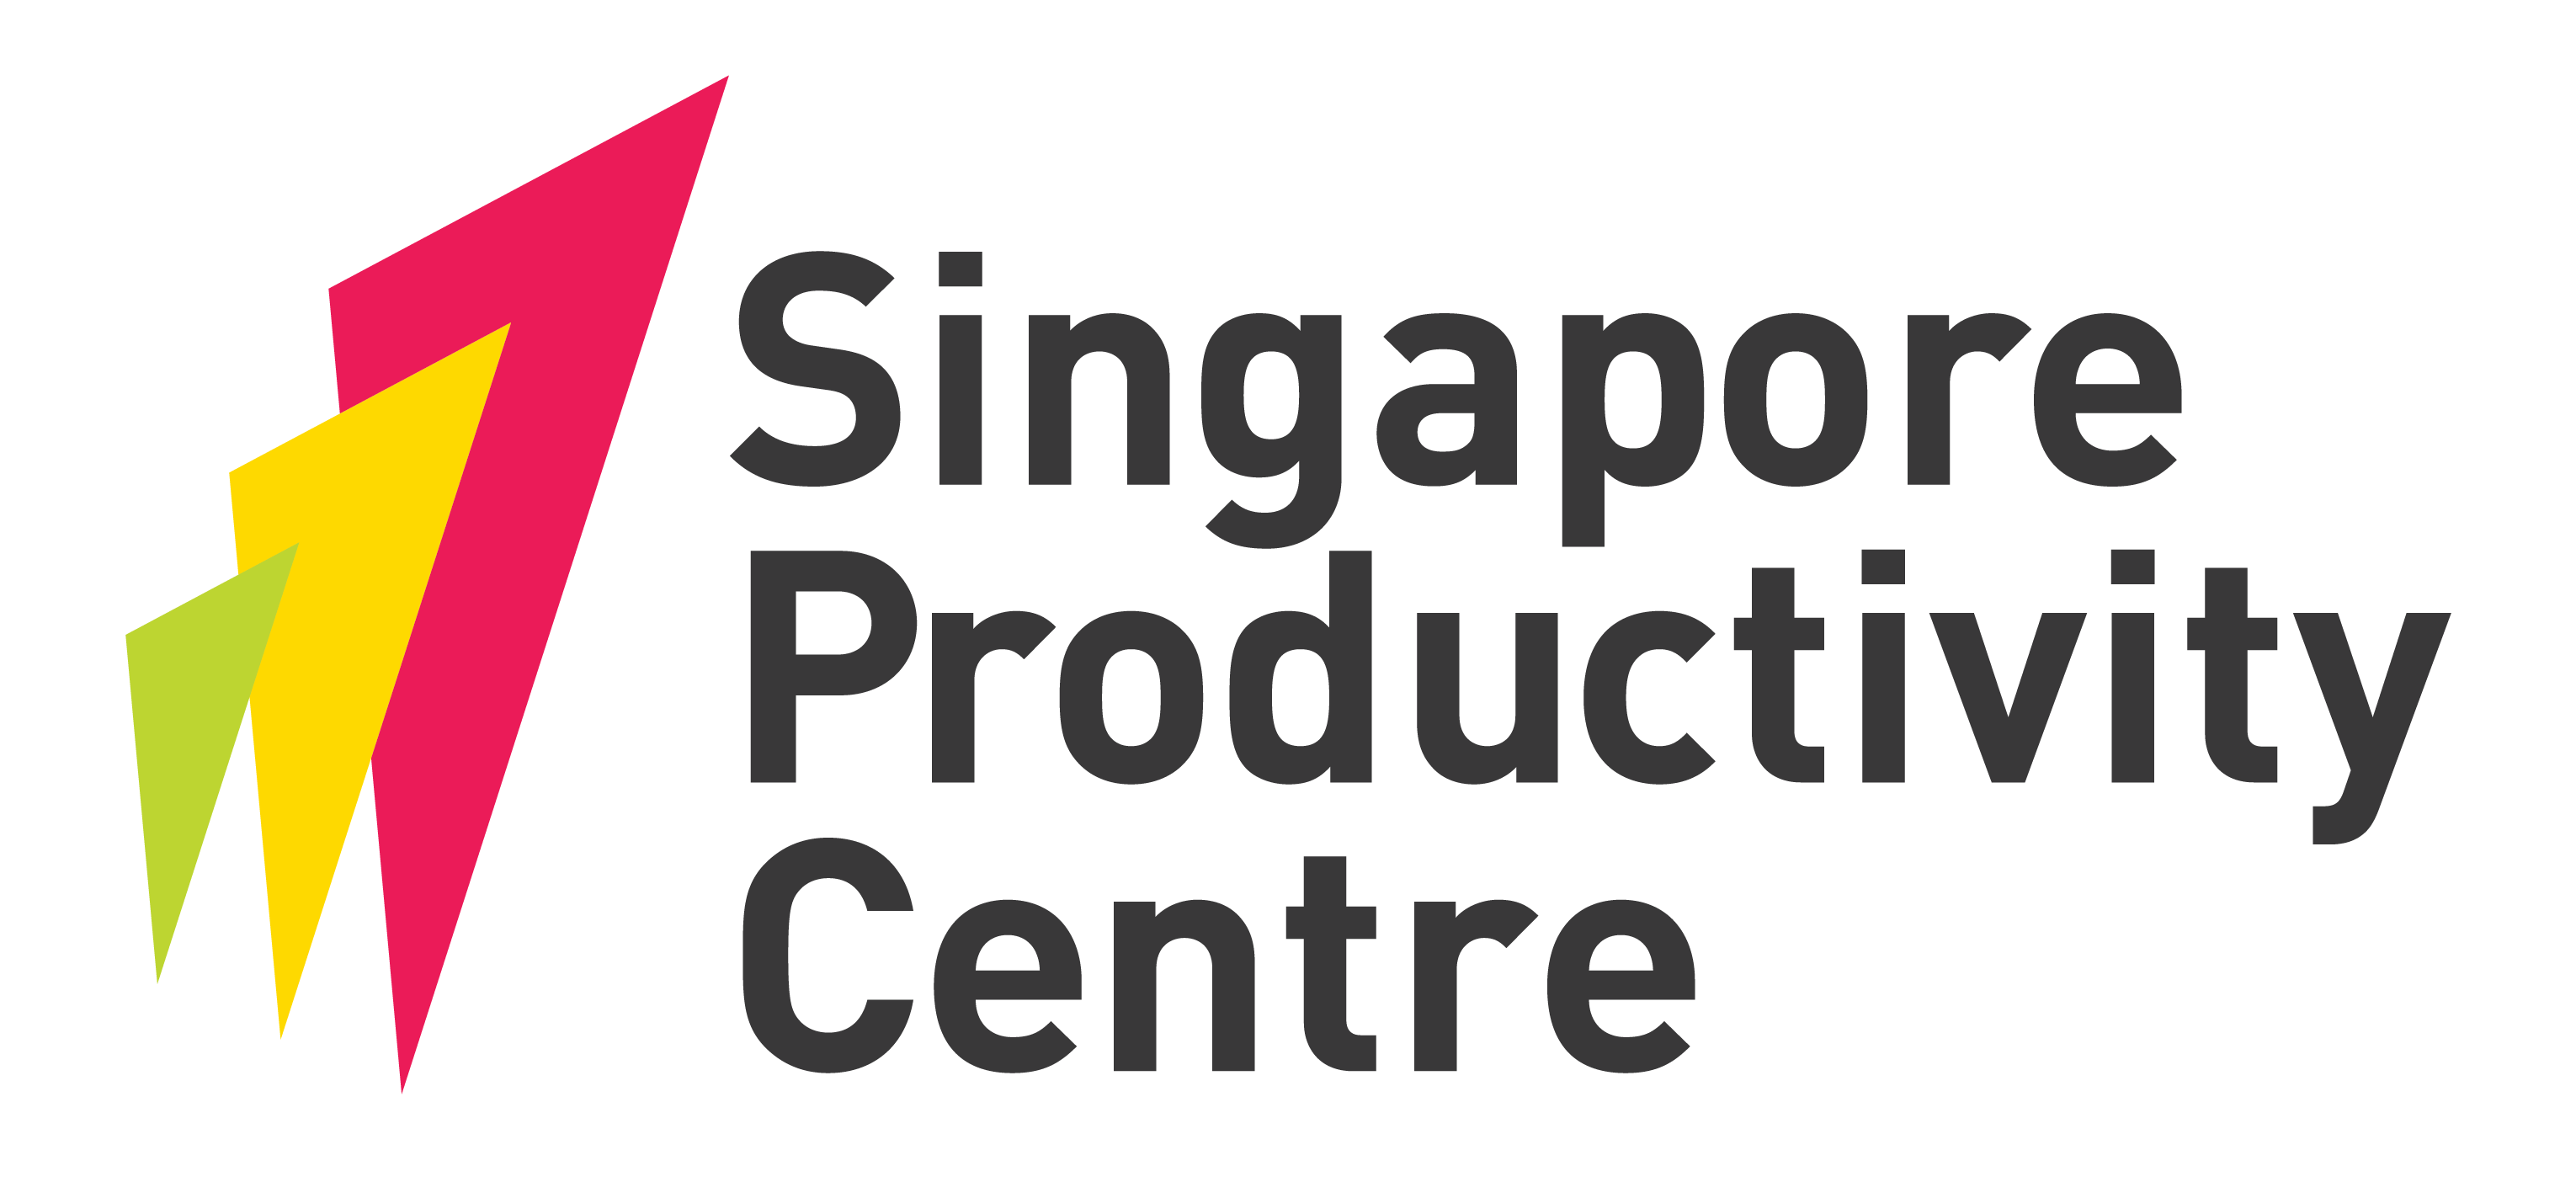 Service Industry Transformation Programme (SITP)